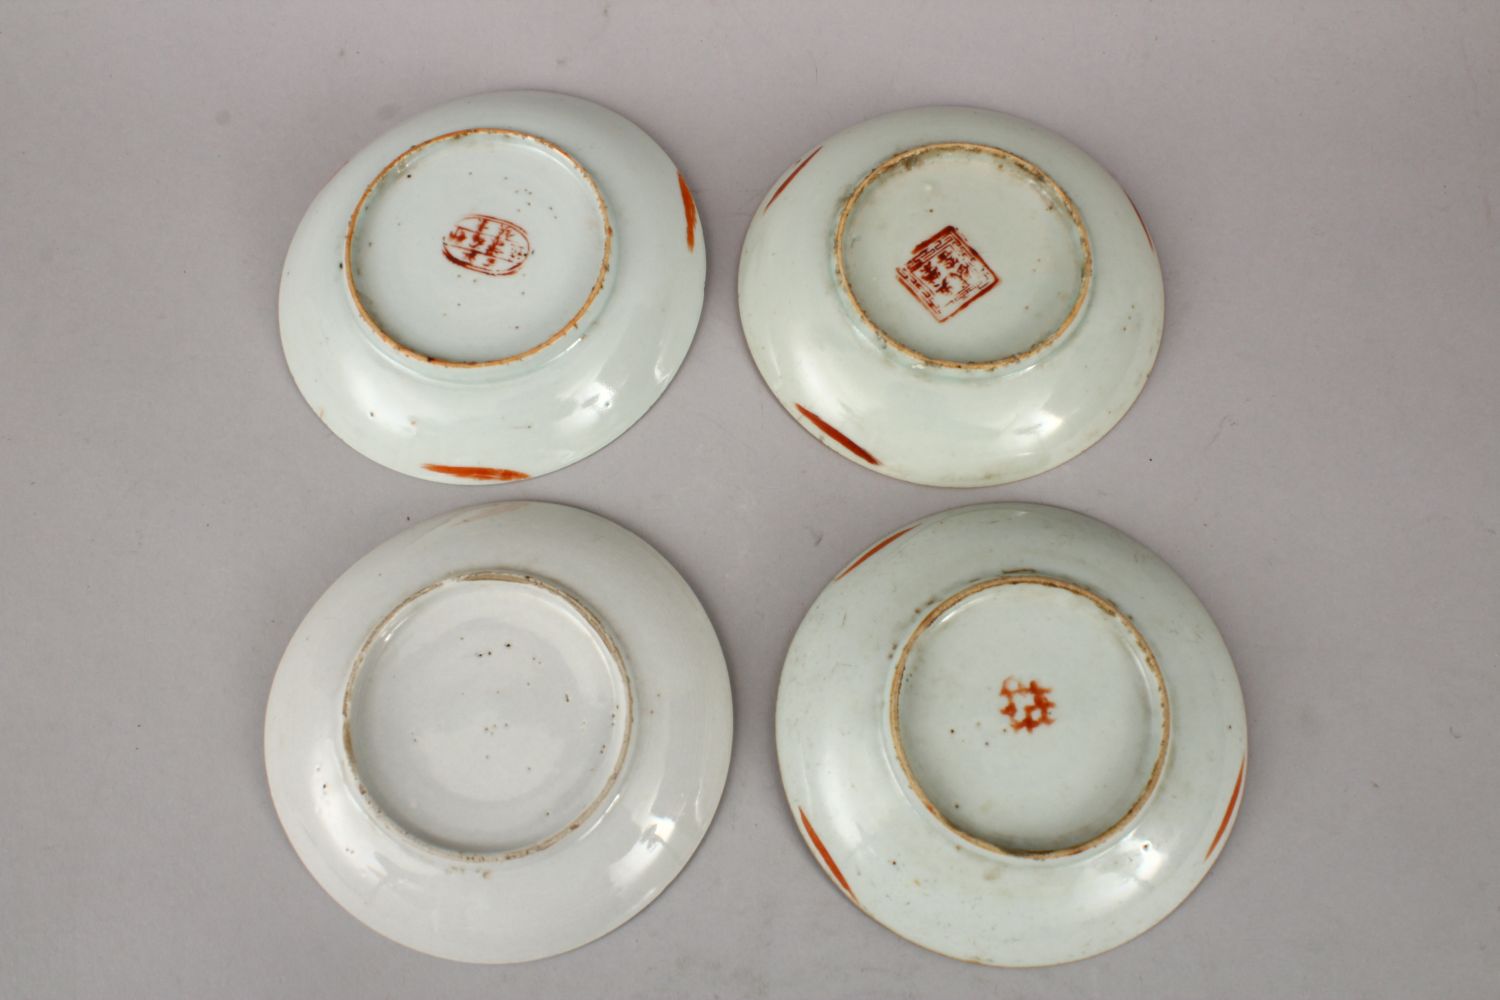 FOUR 19TH CENTURUY CHINESE IRON RED PORCELAIN PLATES, decorate with flora, fruits, bats and symbols, - Image 3 of 5